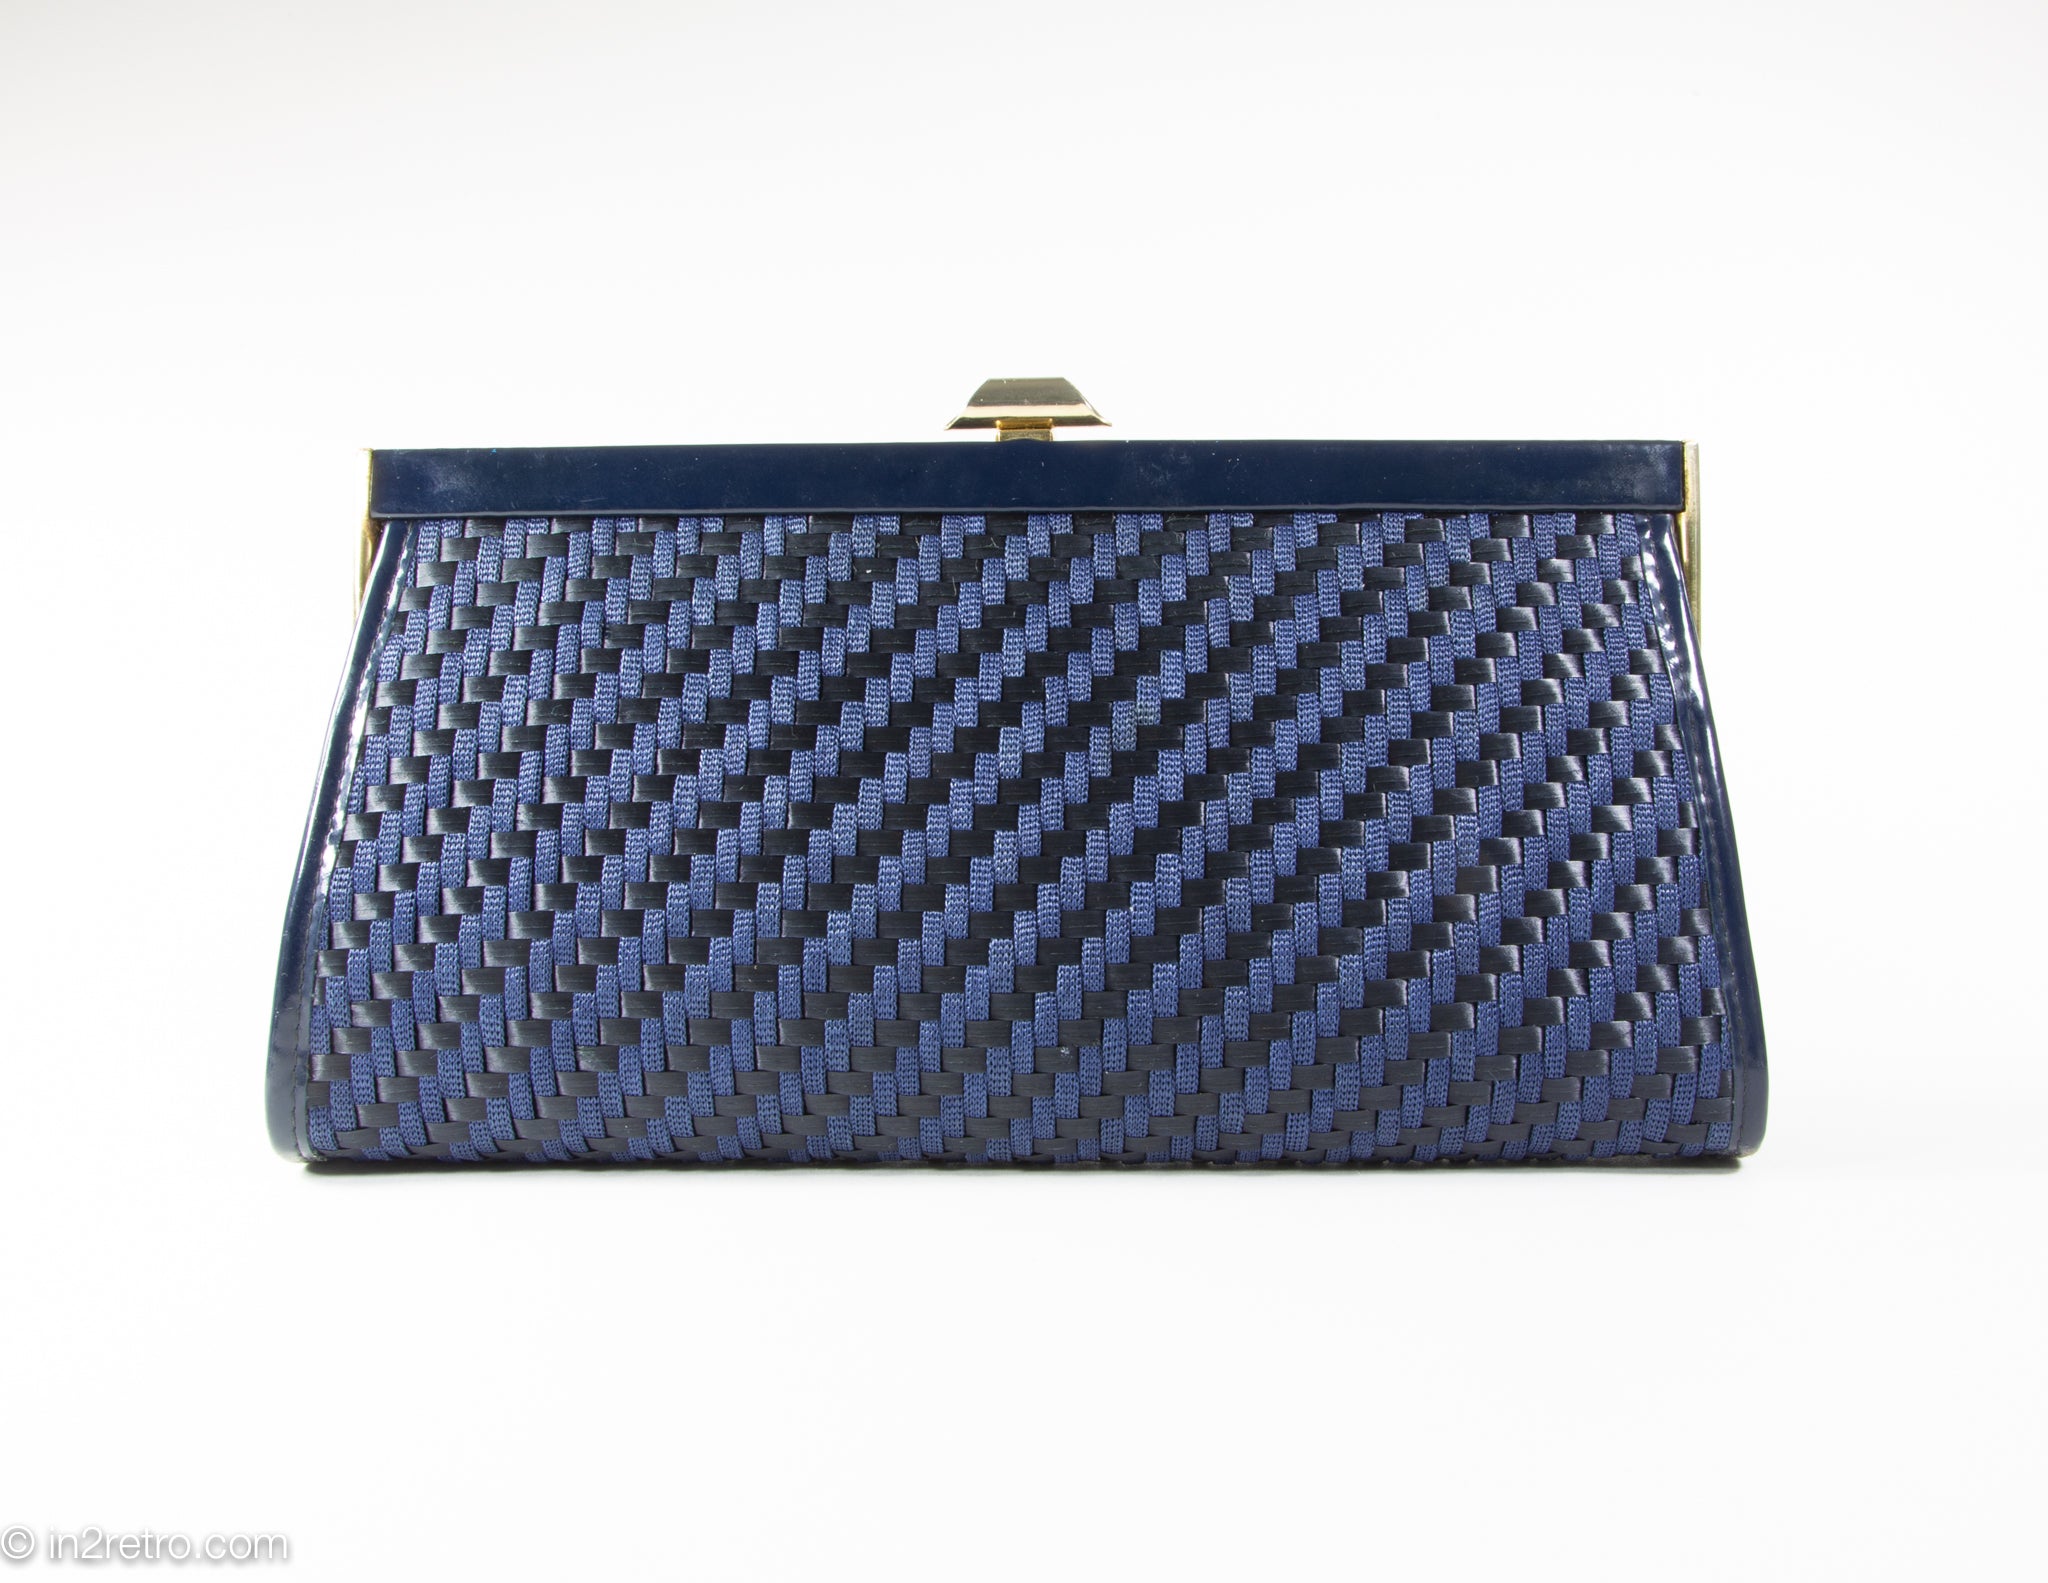 Vintage Creazioni Lucy Shoulder Bag/Clutch Navy Blue Woven Fabric / Patent Frame with Chain - 1960s